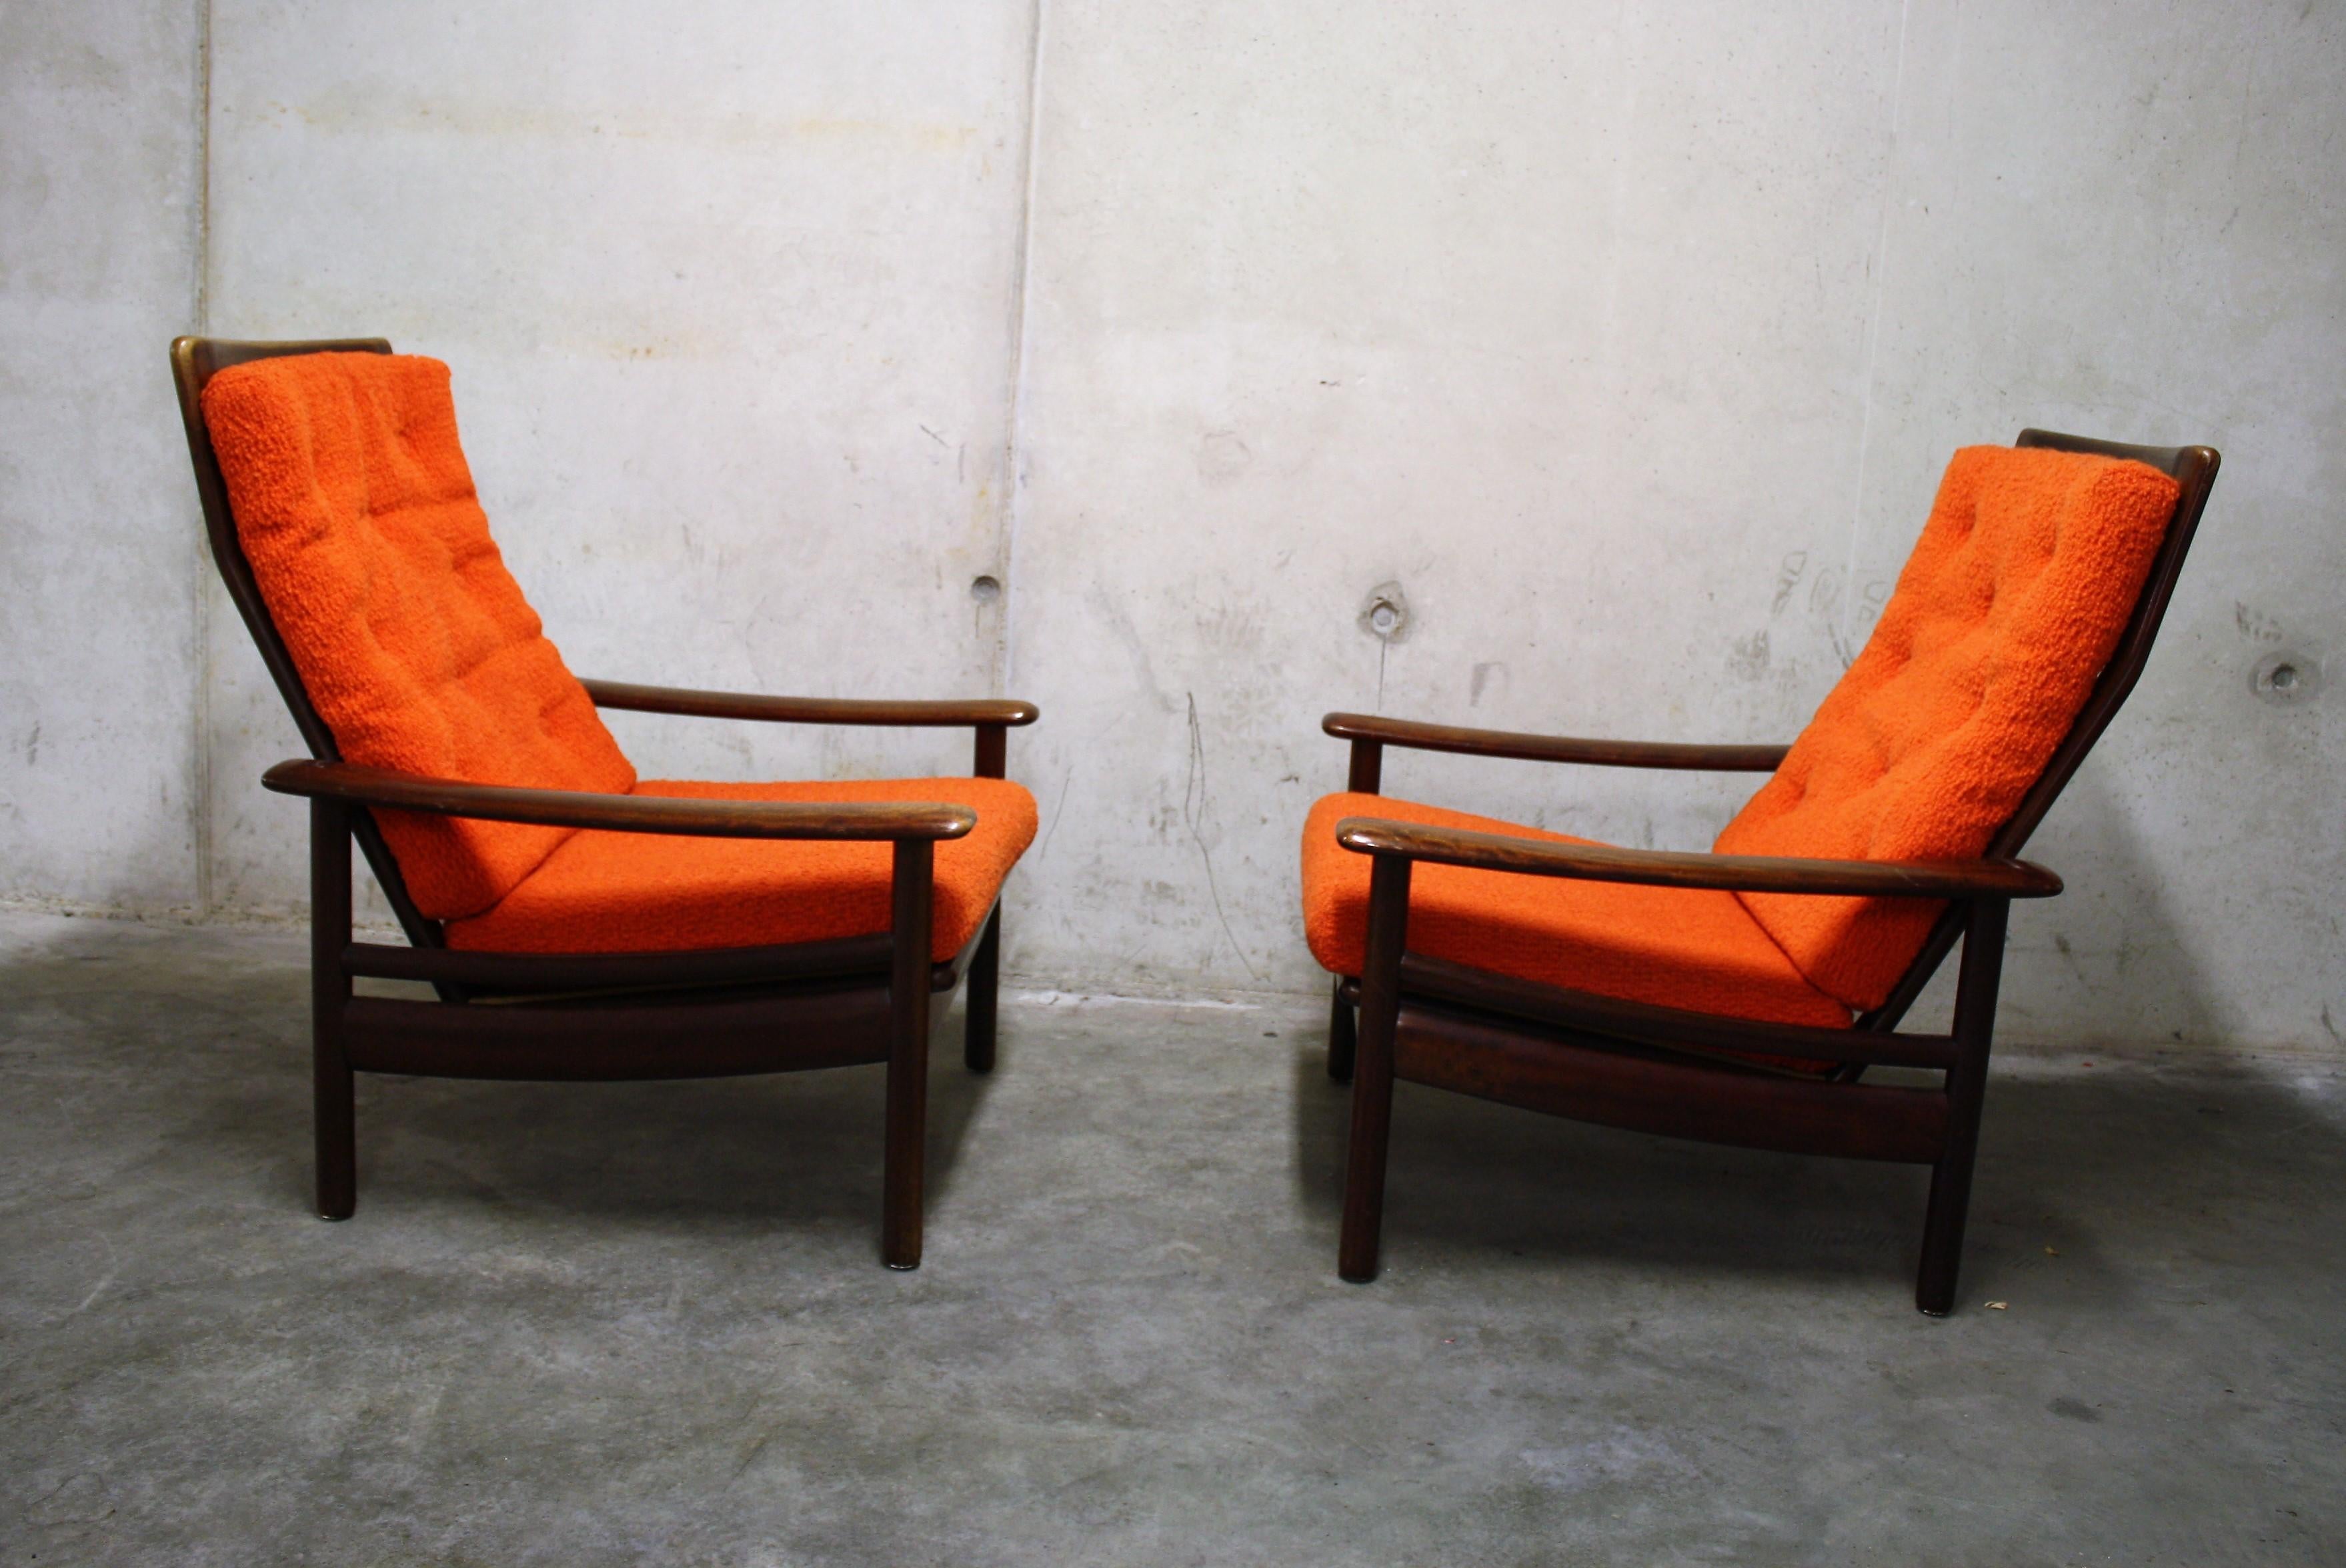 Pair of vintage teak wooden Scandinavian lounge chairs.

They feature orange fabric cushions, but we can provide a modern day color for the cushions as well.

They have a beautiful elegant Scandinavian design which make them so charming.

Good